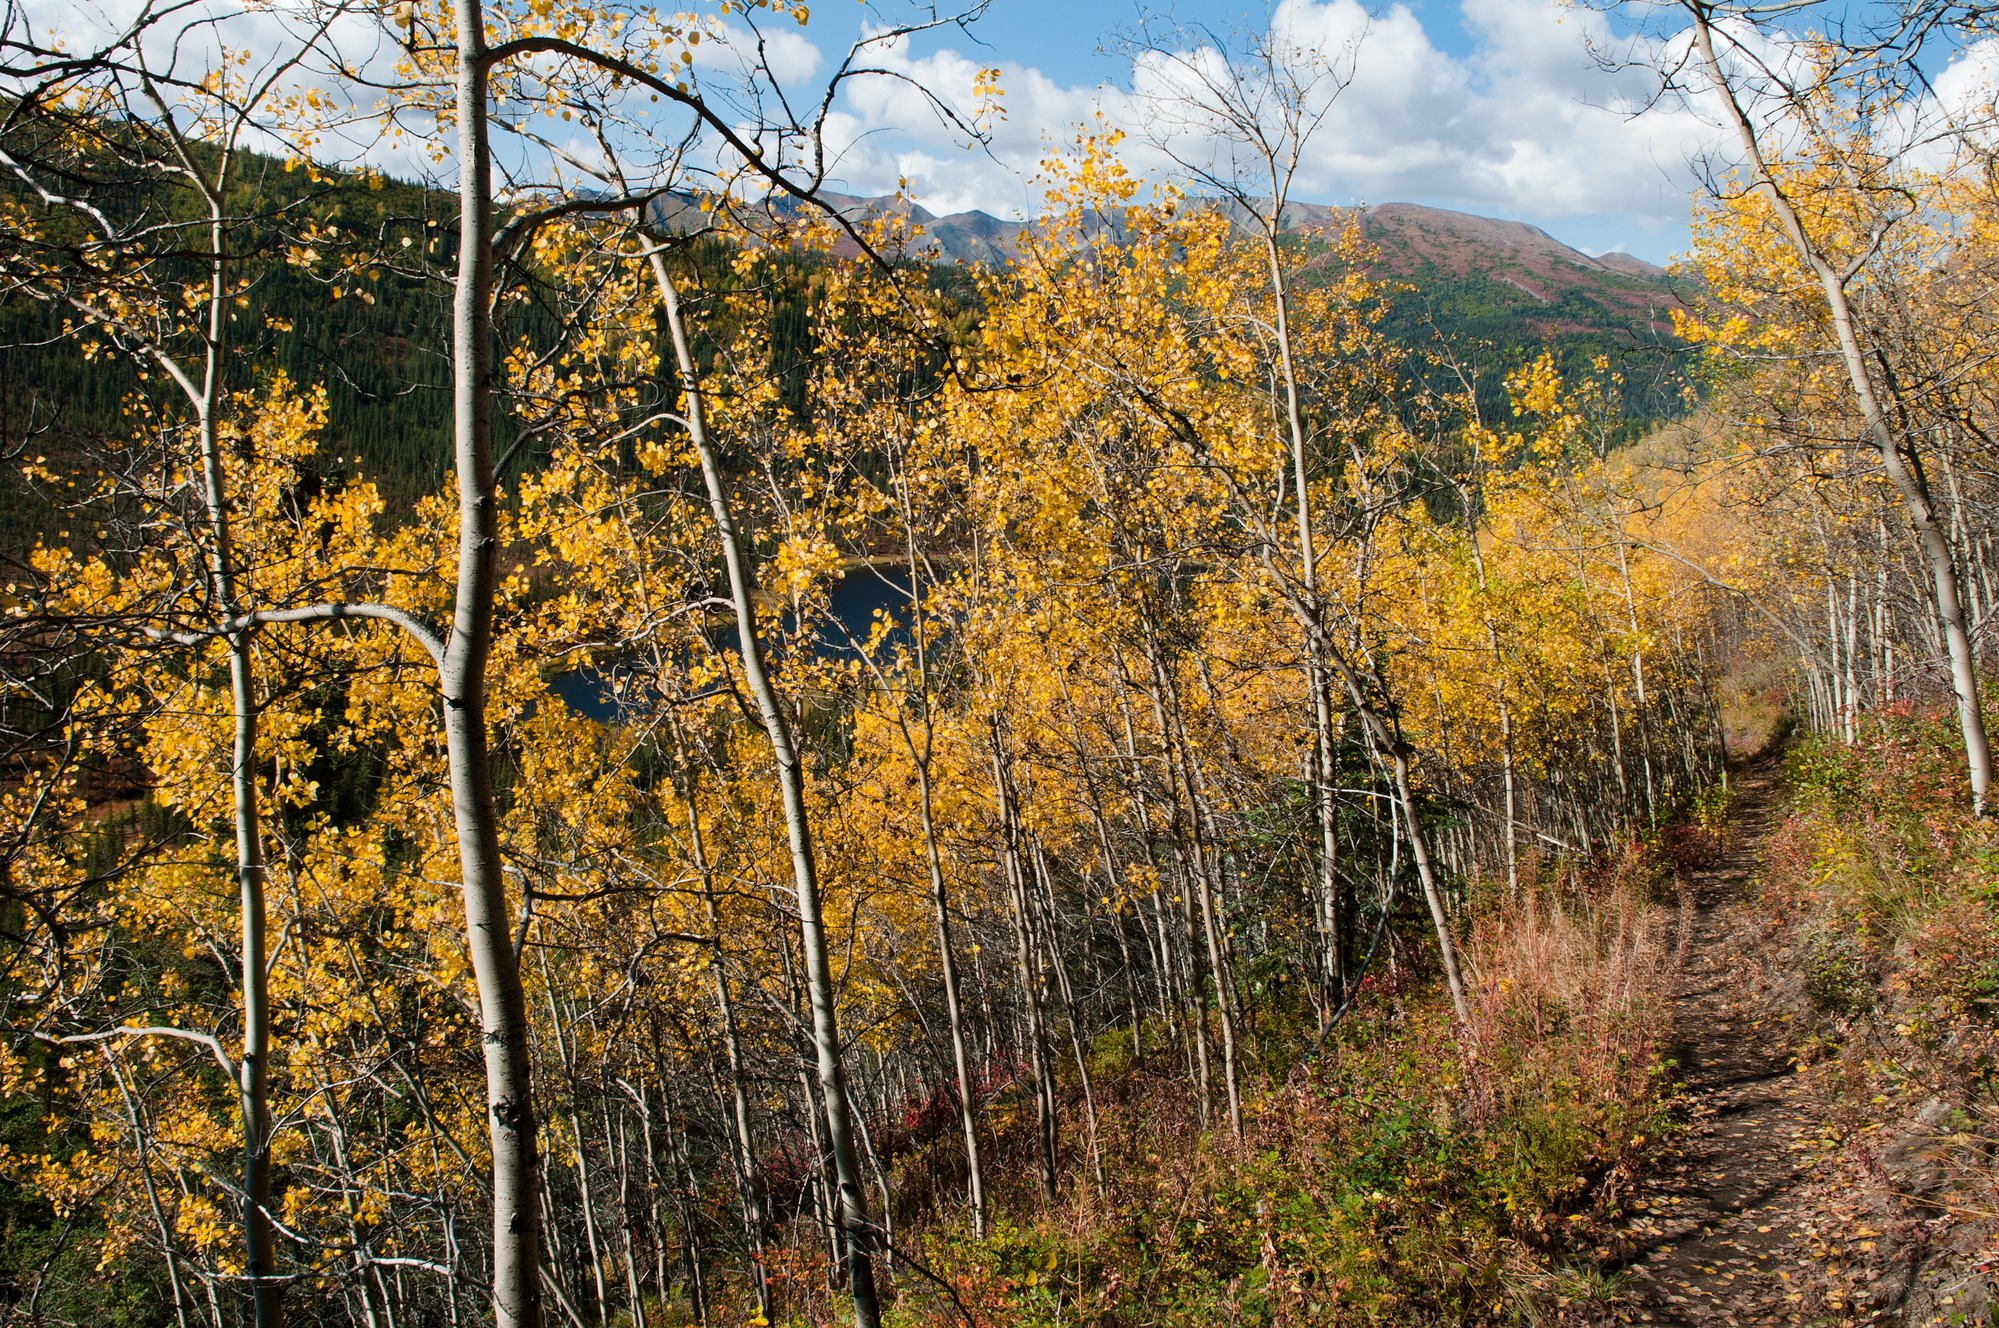 white-barked trees with yellow leaves on a hillside